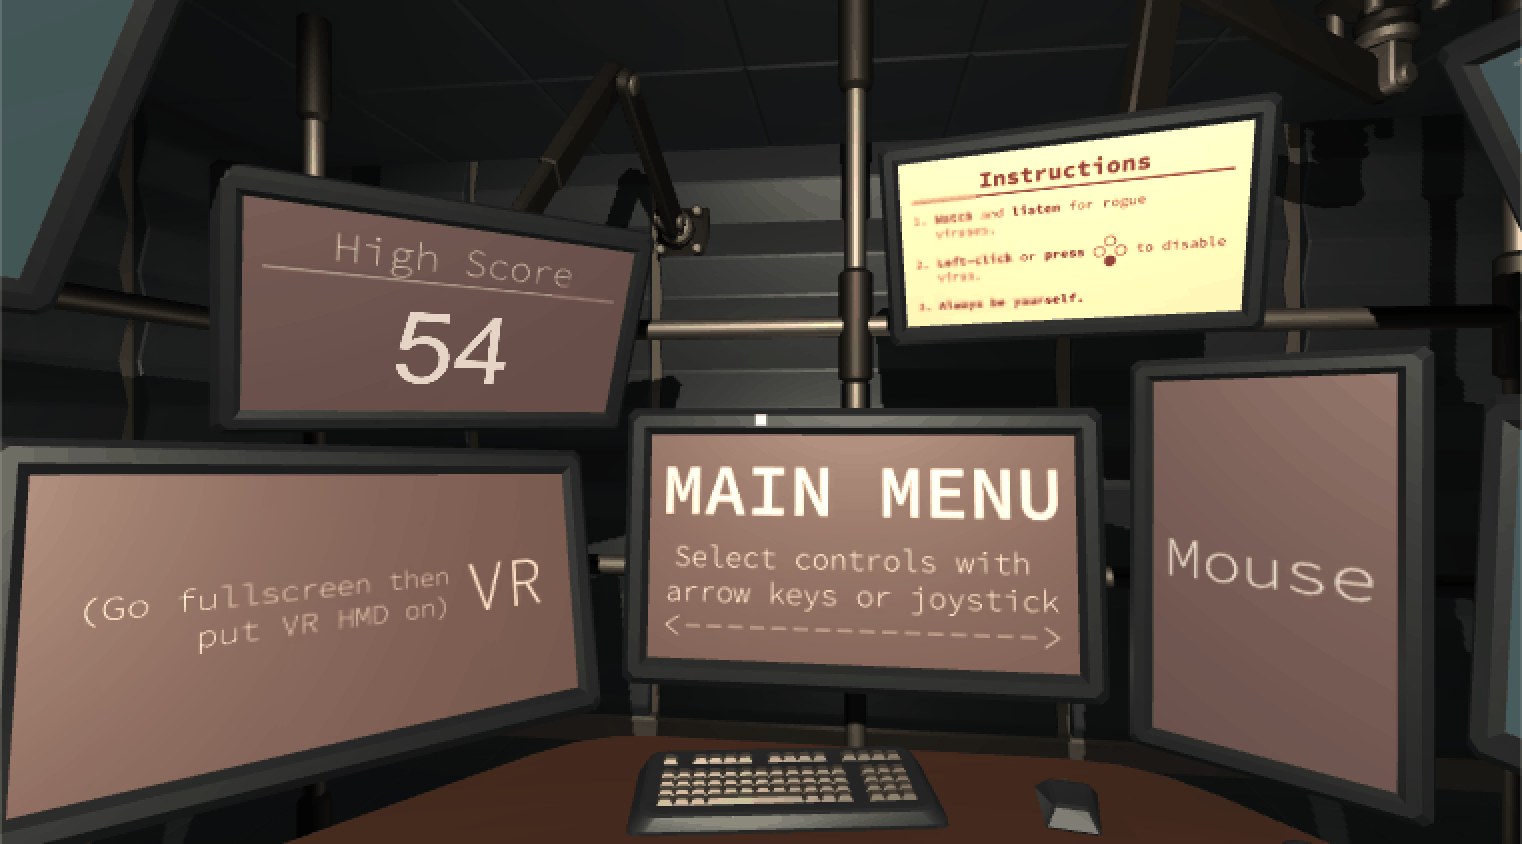 VR text